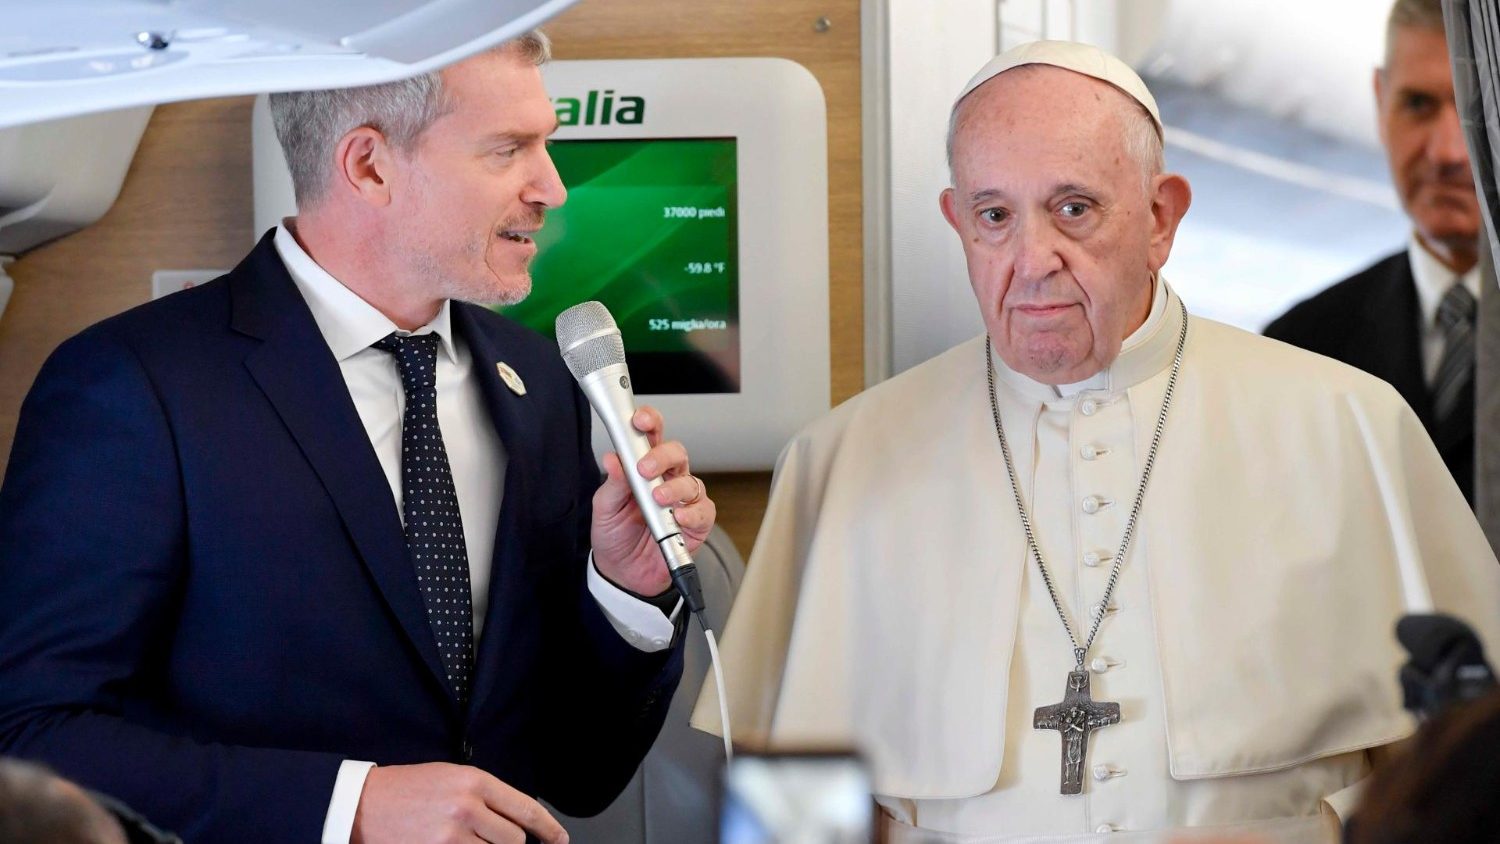 Pope Francis to Catholic Media: Be signs of unity amid diversity - Vatican News